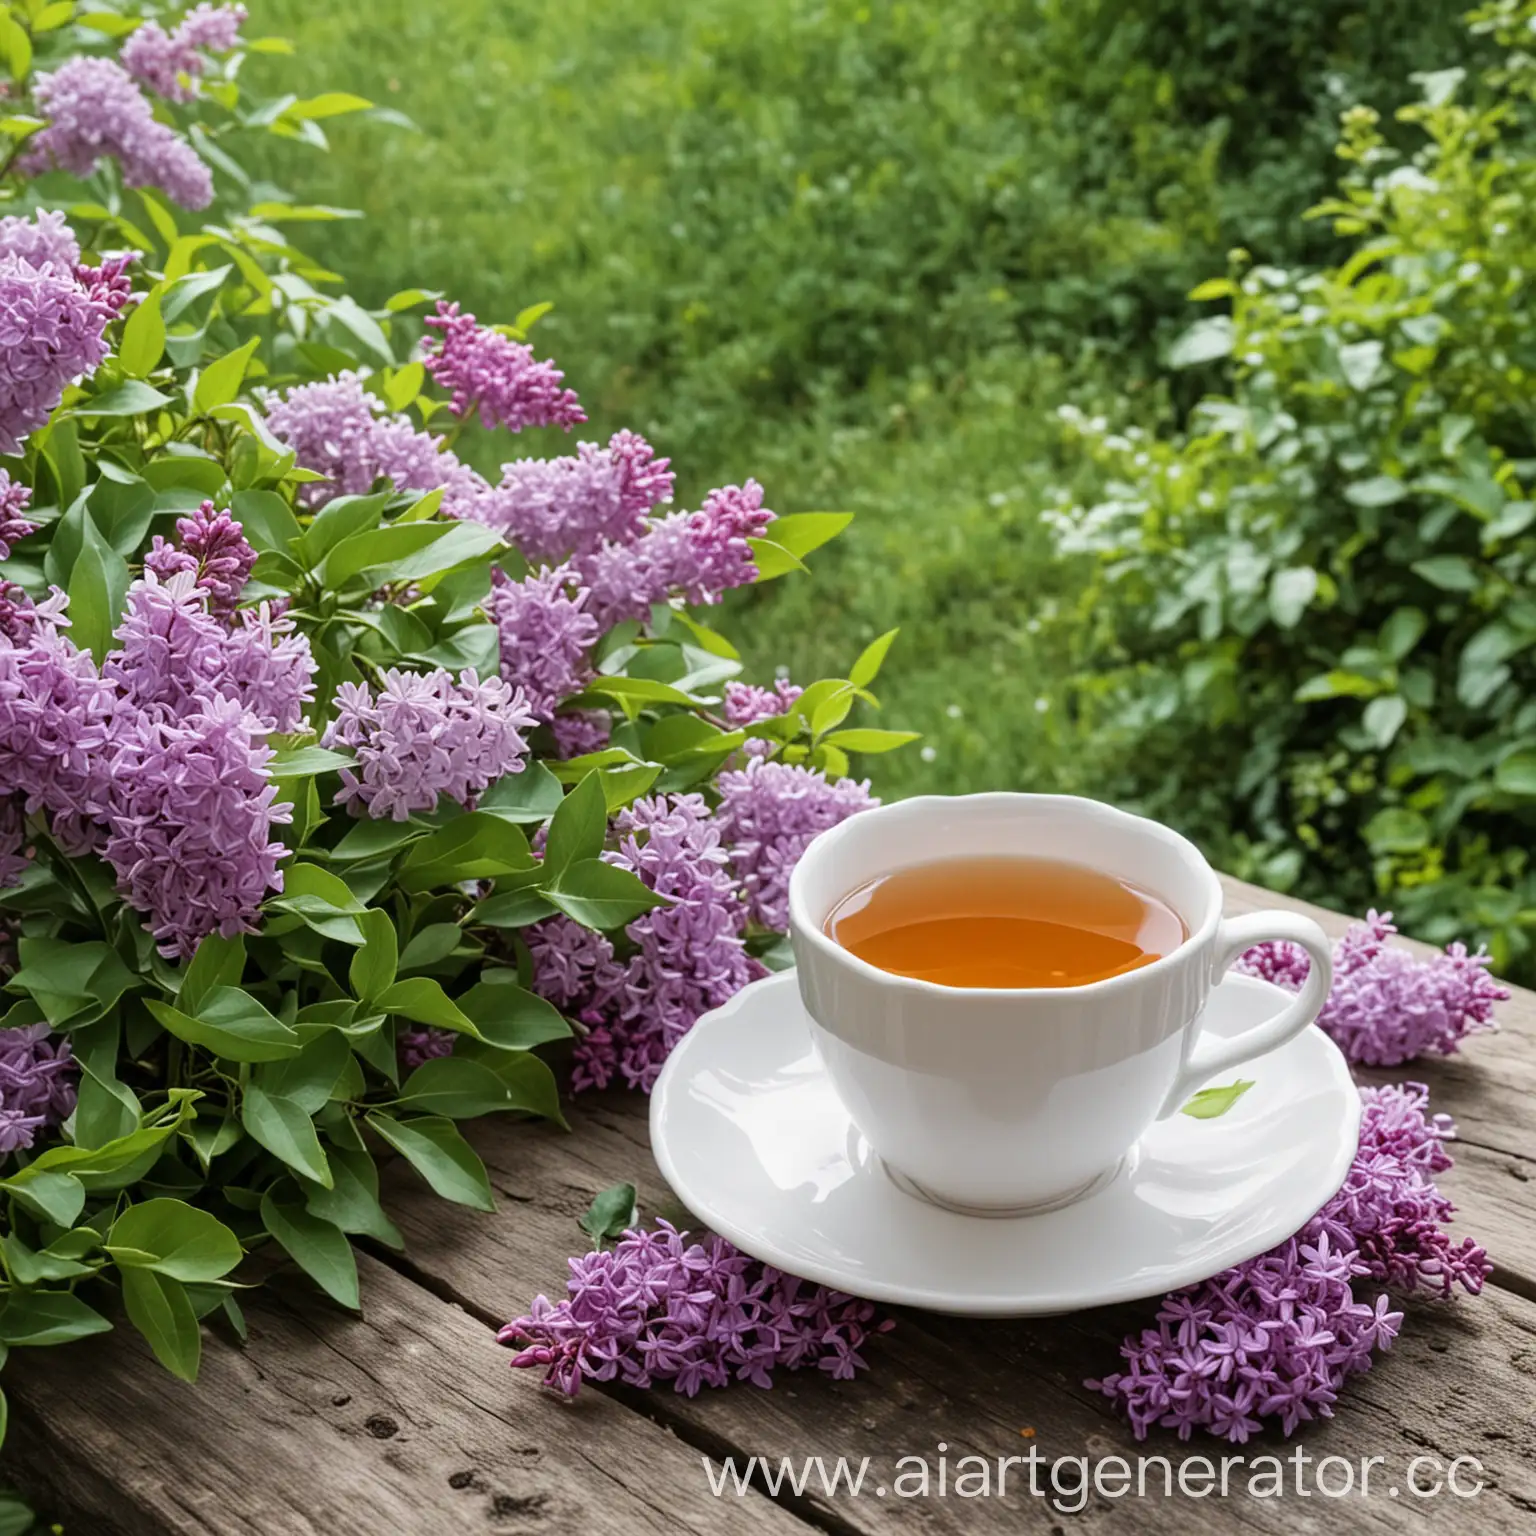 Tea-in-a-White-Cup-on-a-Wooden-Table-in-Nature-with-Lilac-Bushes